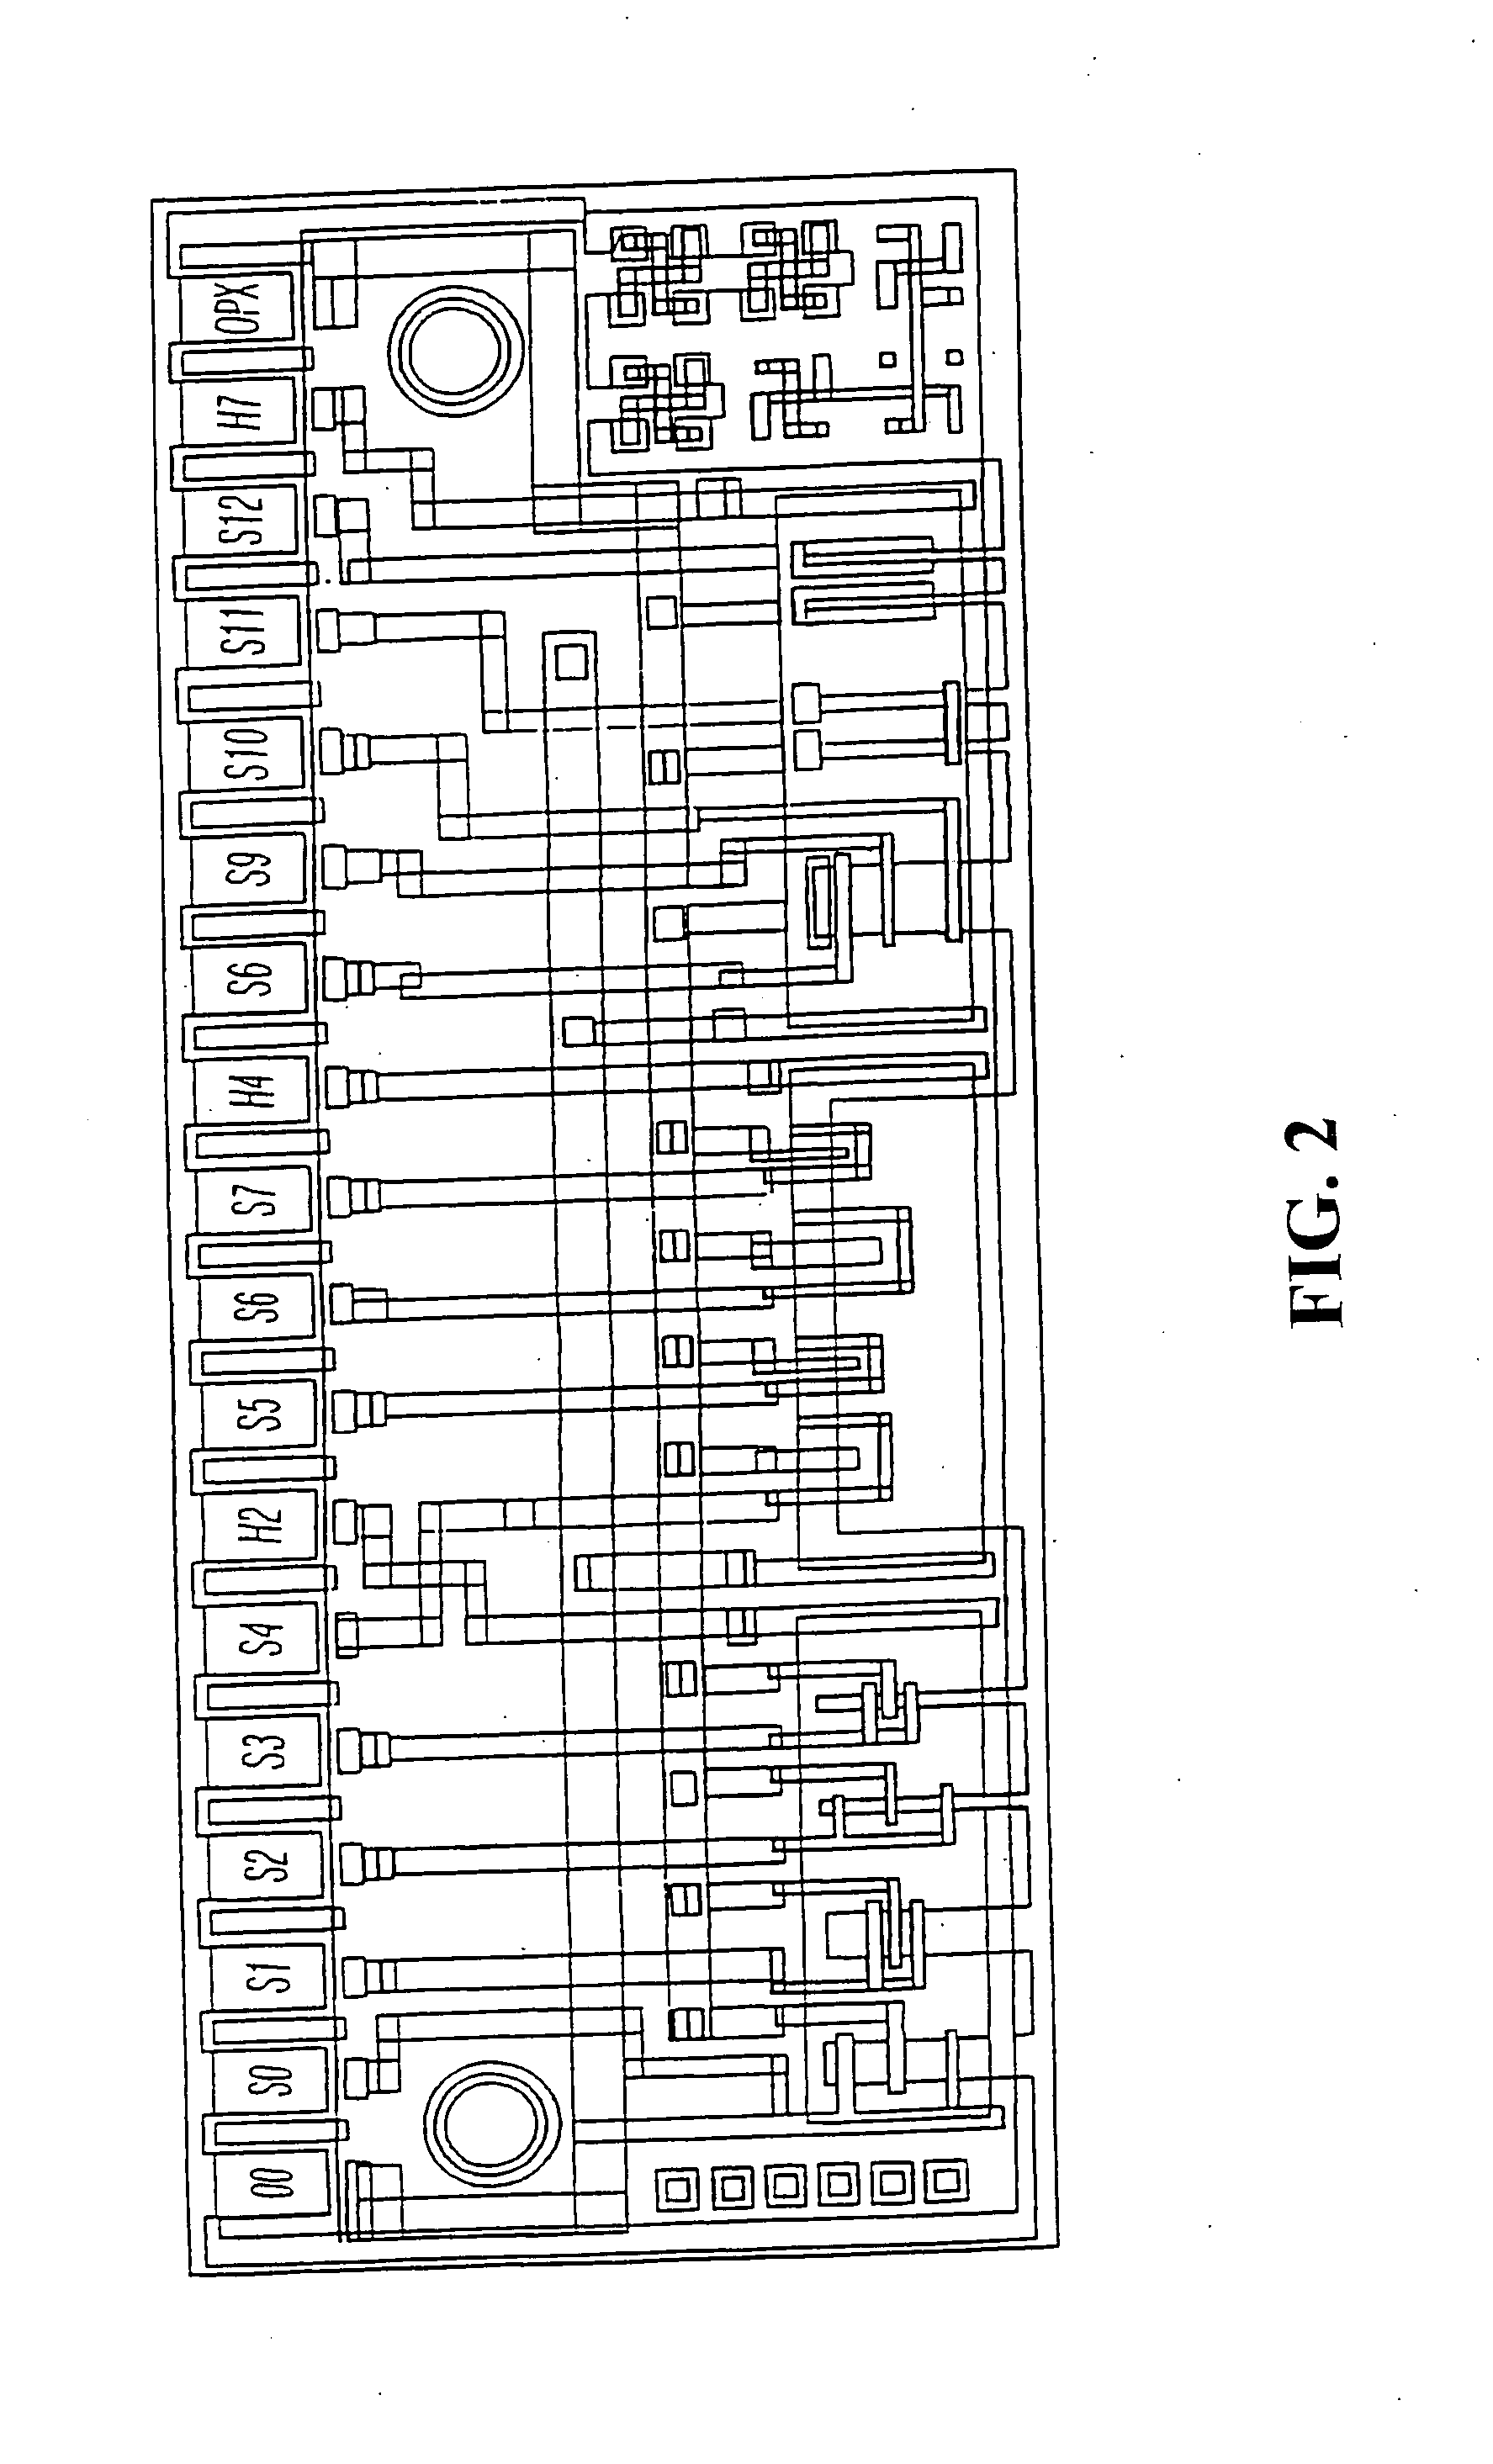 System and method for monitoring health using exhaled breath